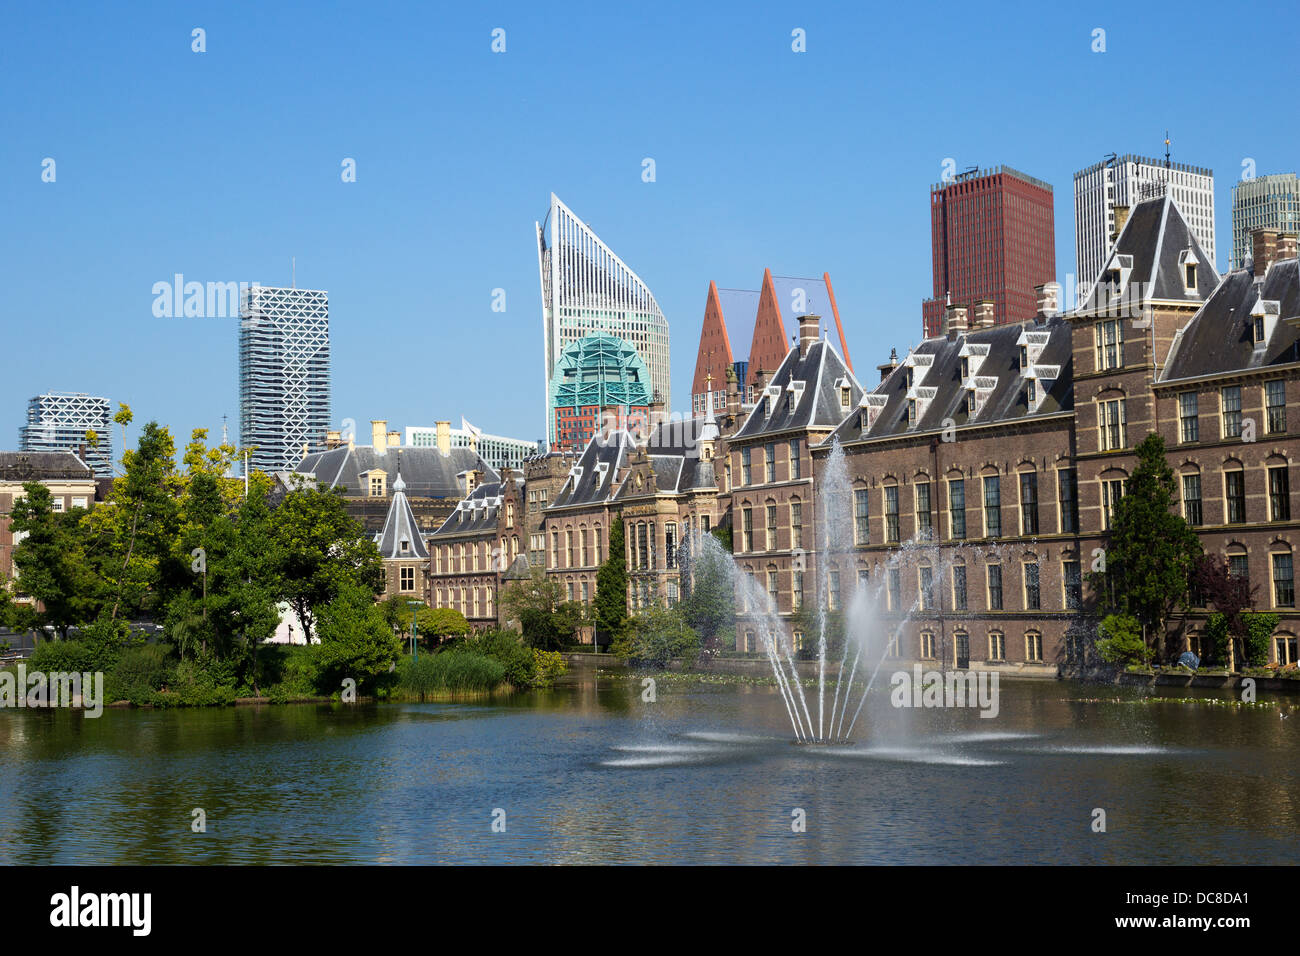 Dutch Parliament in The Hague, The Netherlands Stock Photo